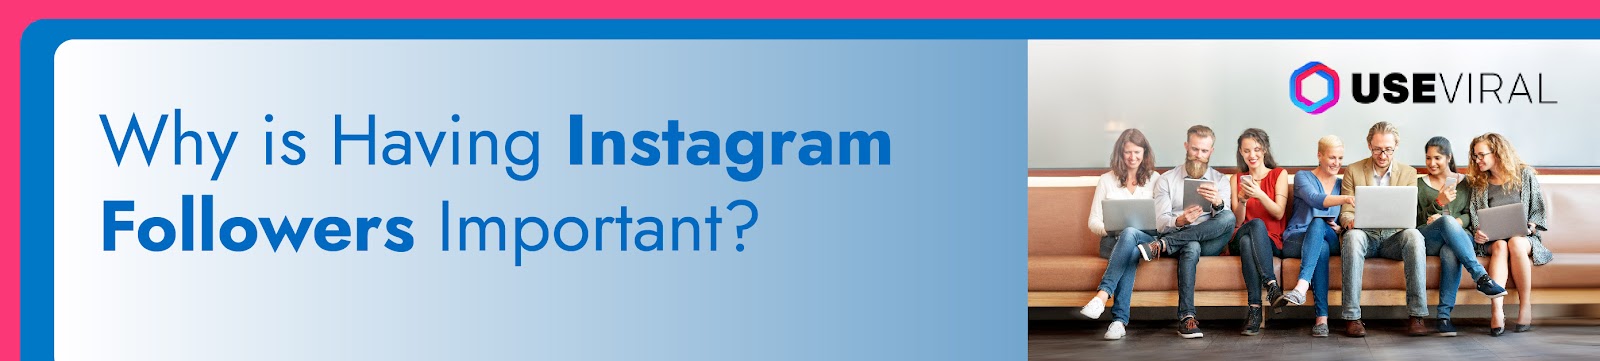 Why is Having Instagram Followers Important?